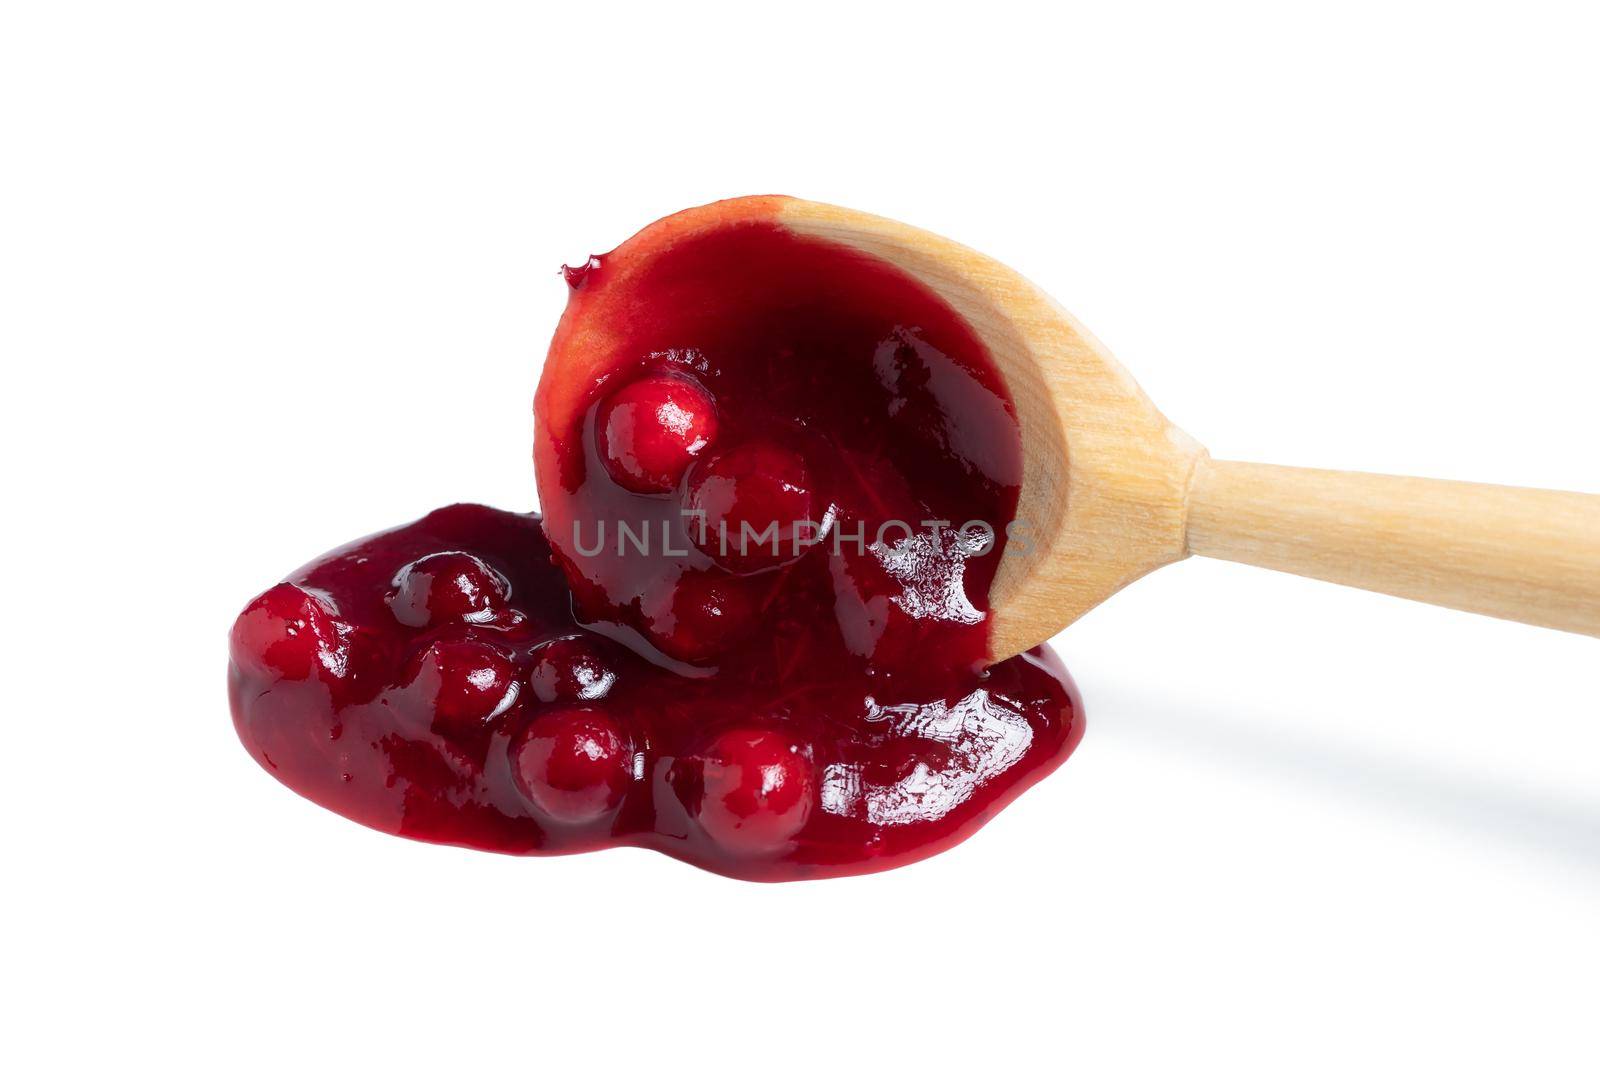 Homemade sauce made from fresh wild lingonberry drips from a spoon. Isolated on white background by galsand